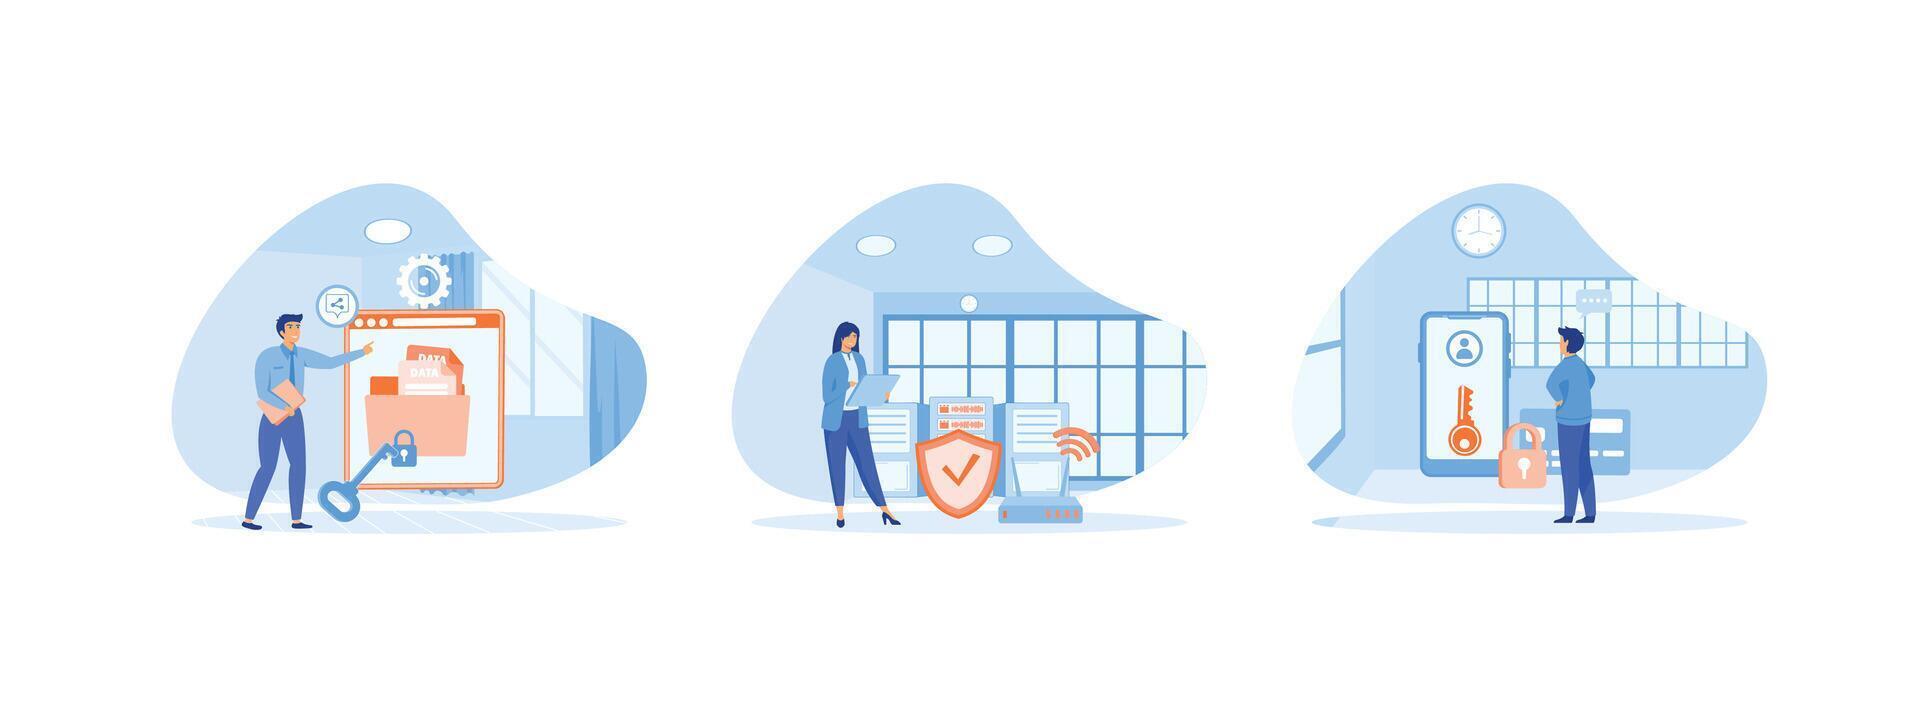 Characters using Security Services to Protect Personal Data, performs Cloud Shared Documents security, Server Security and Data Protection.  Cyber security set flat vector modern illustration